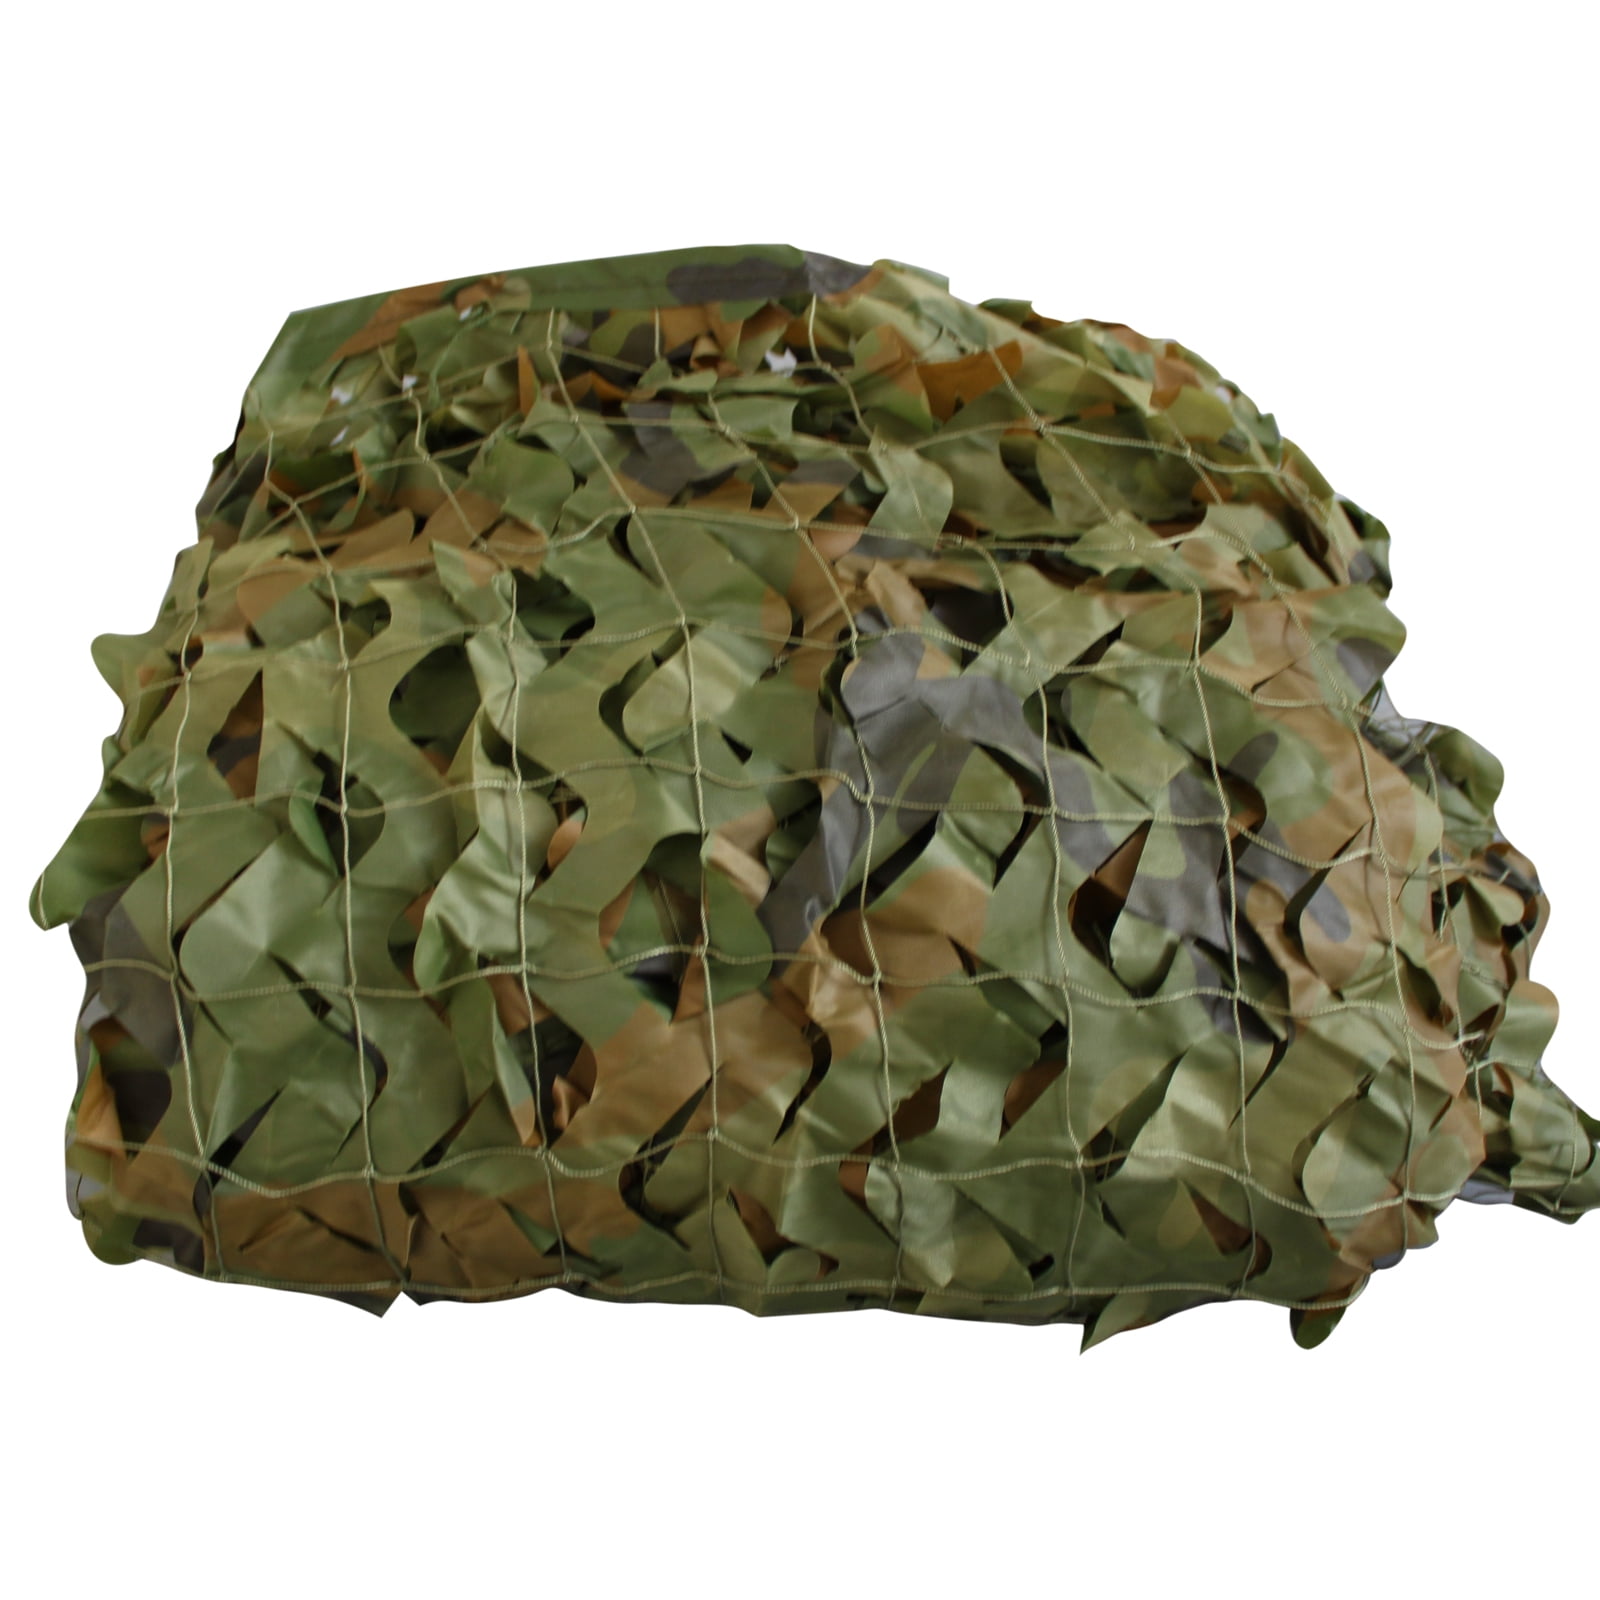 Details about   Camouflage Netting Outdoor Hunting Camping Camo Net Cover Woodland H4G7 show original title 